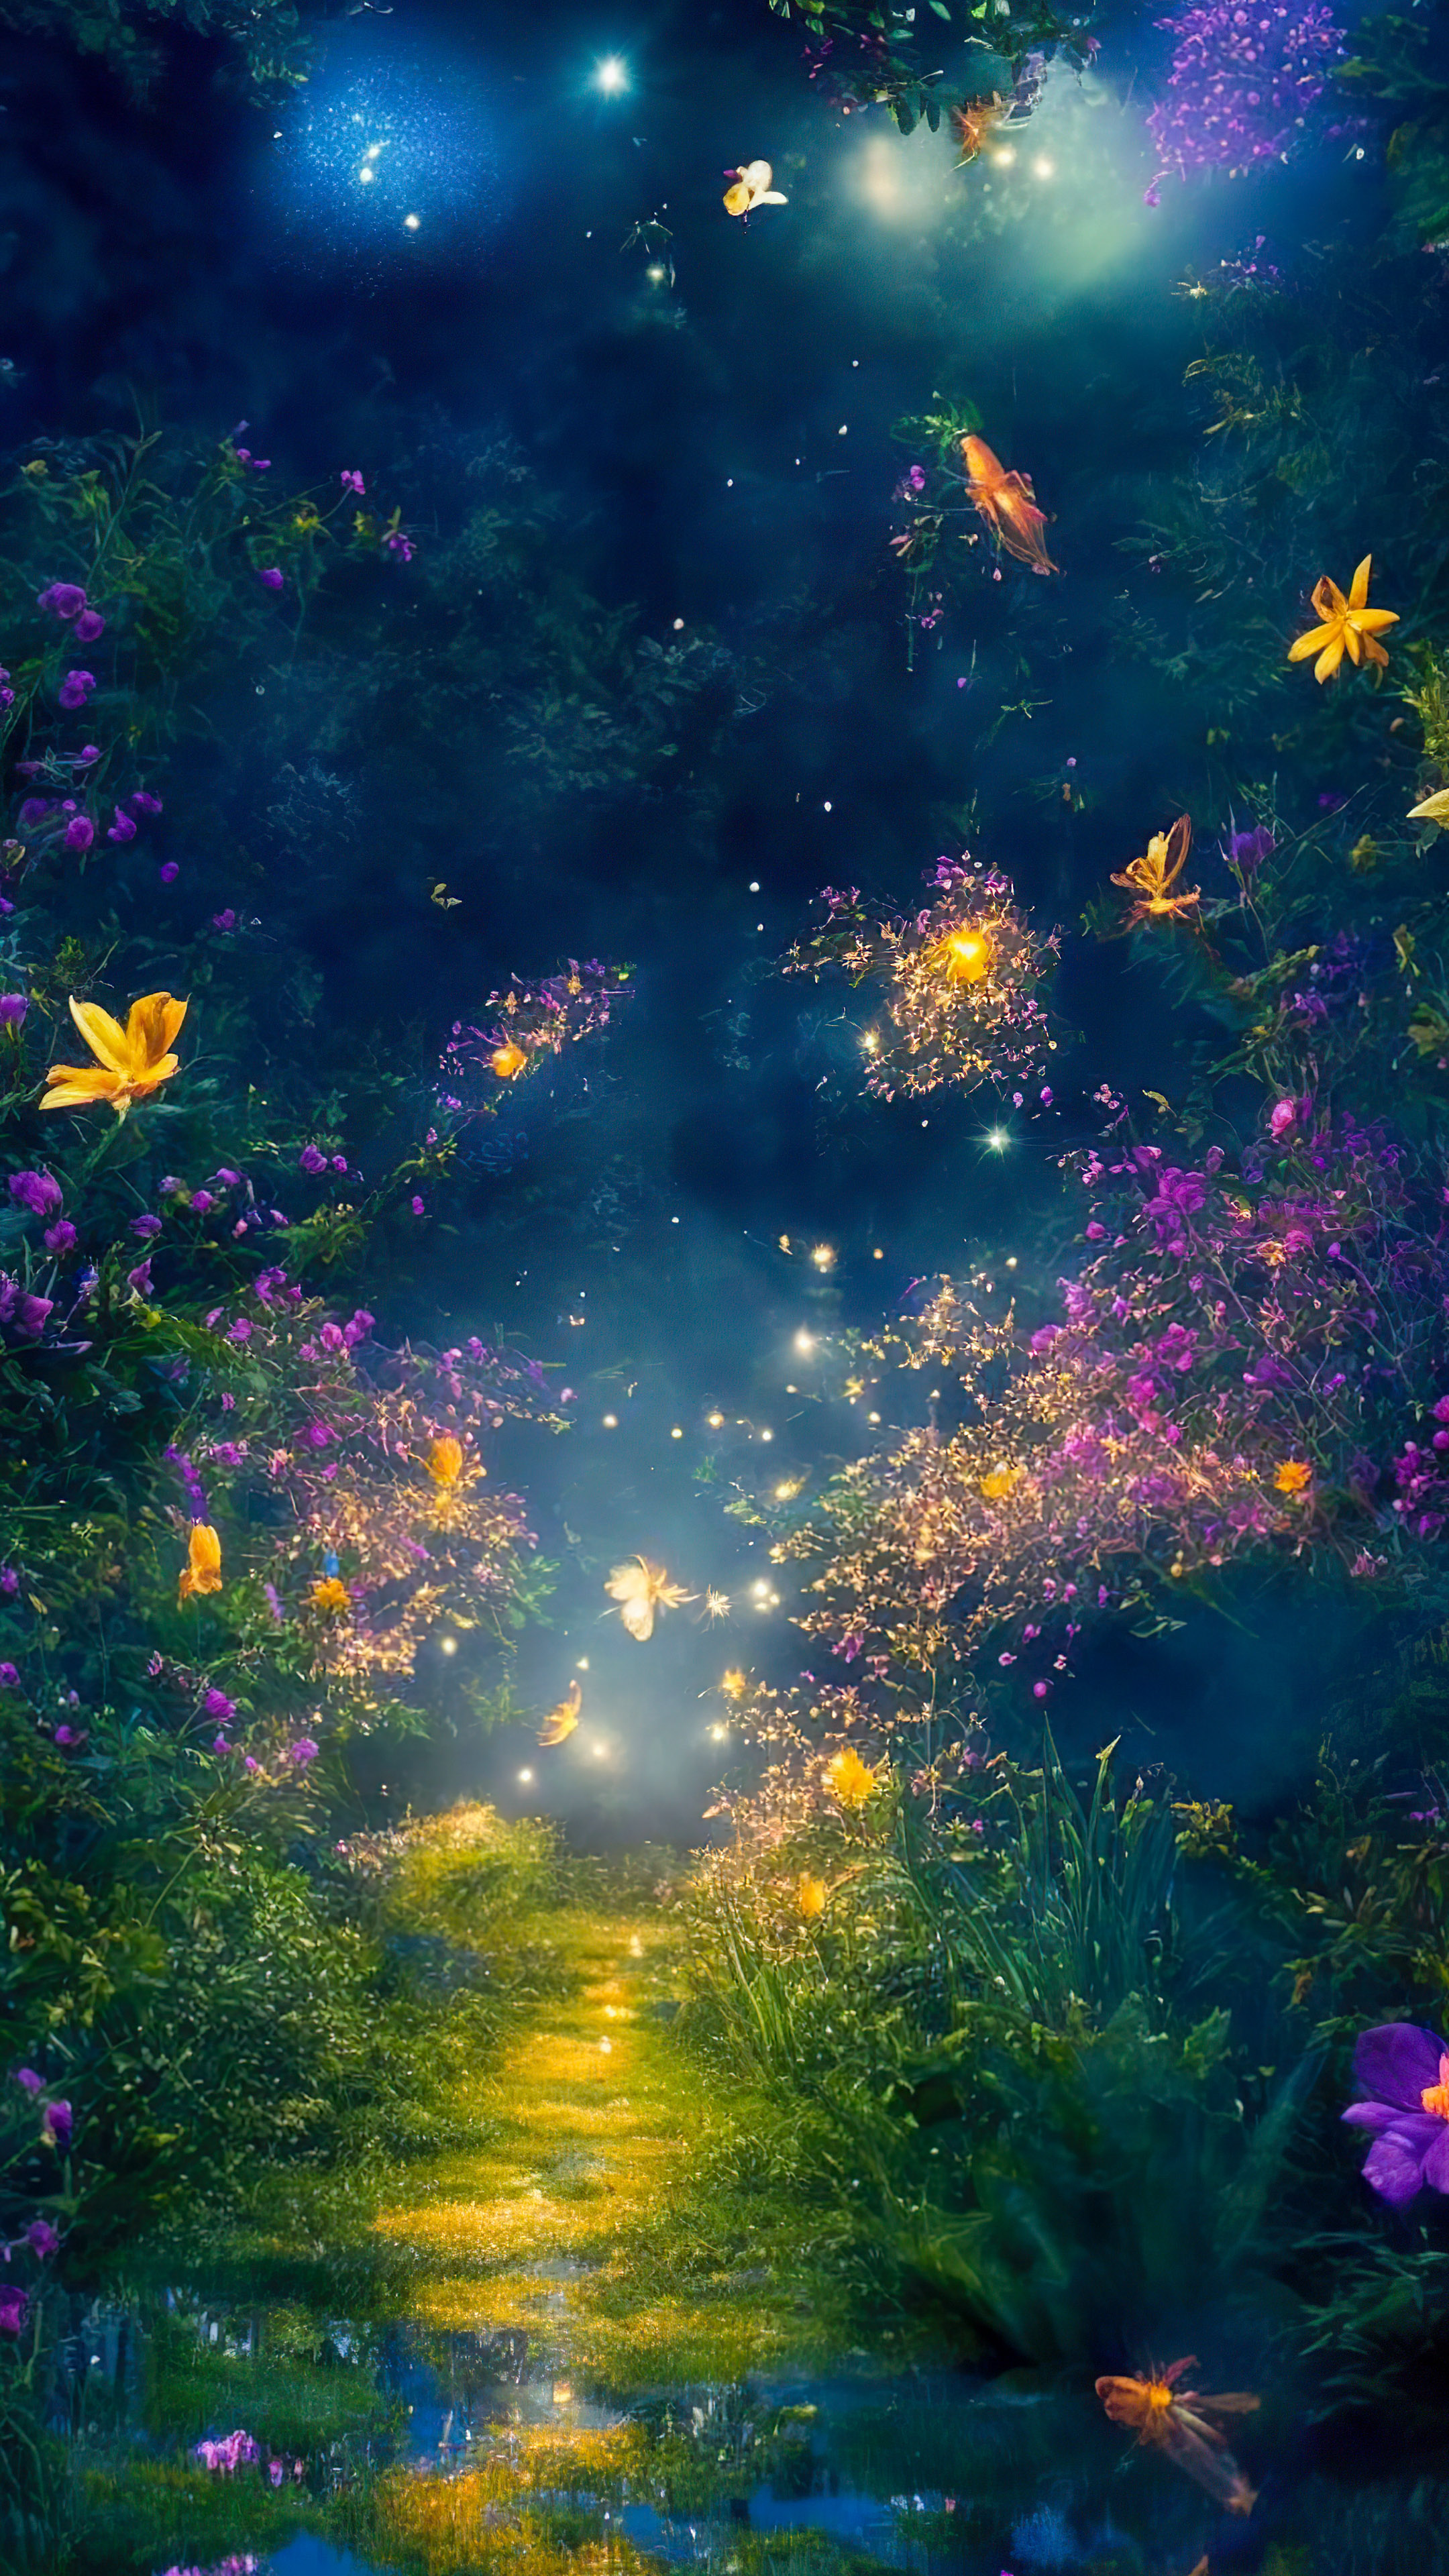 Download the whimsy of our fantasy landscape wallpaper, illustrating a magical and whimsical garden at night, where fireflies dance around vibrant, luminescent flowers.